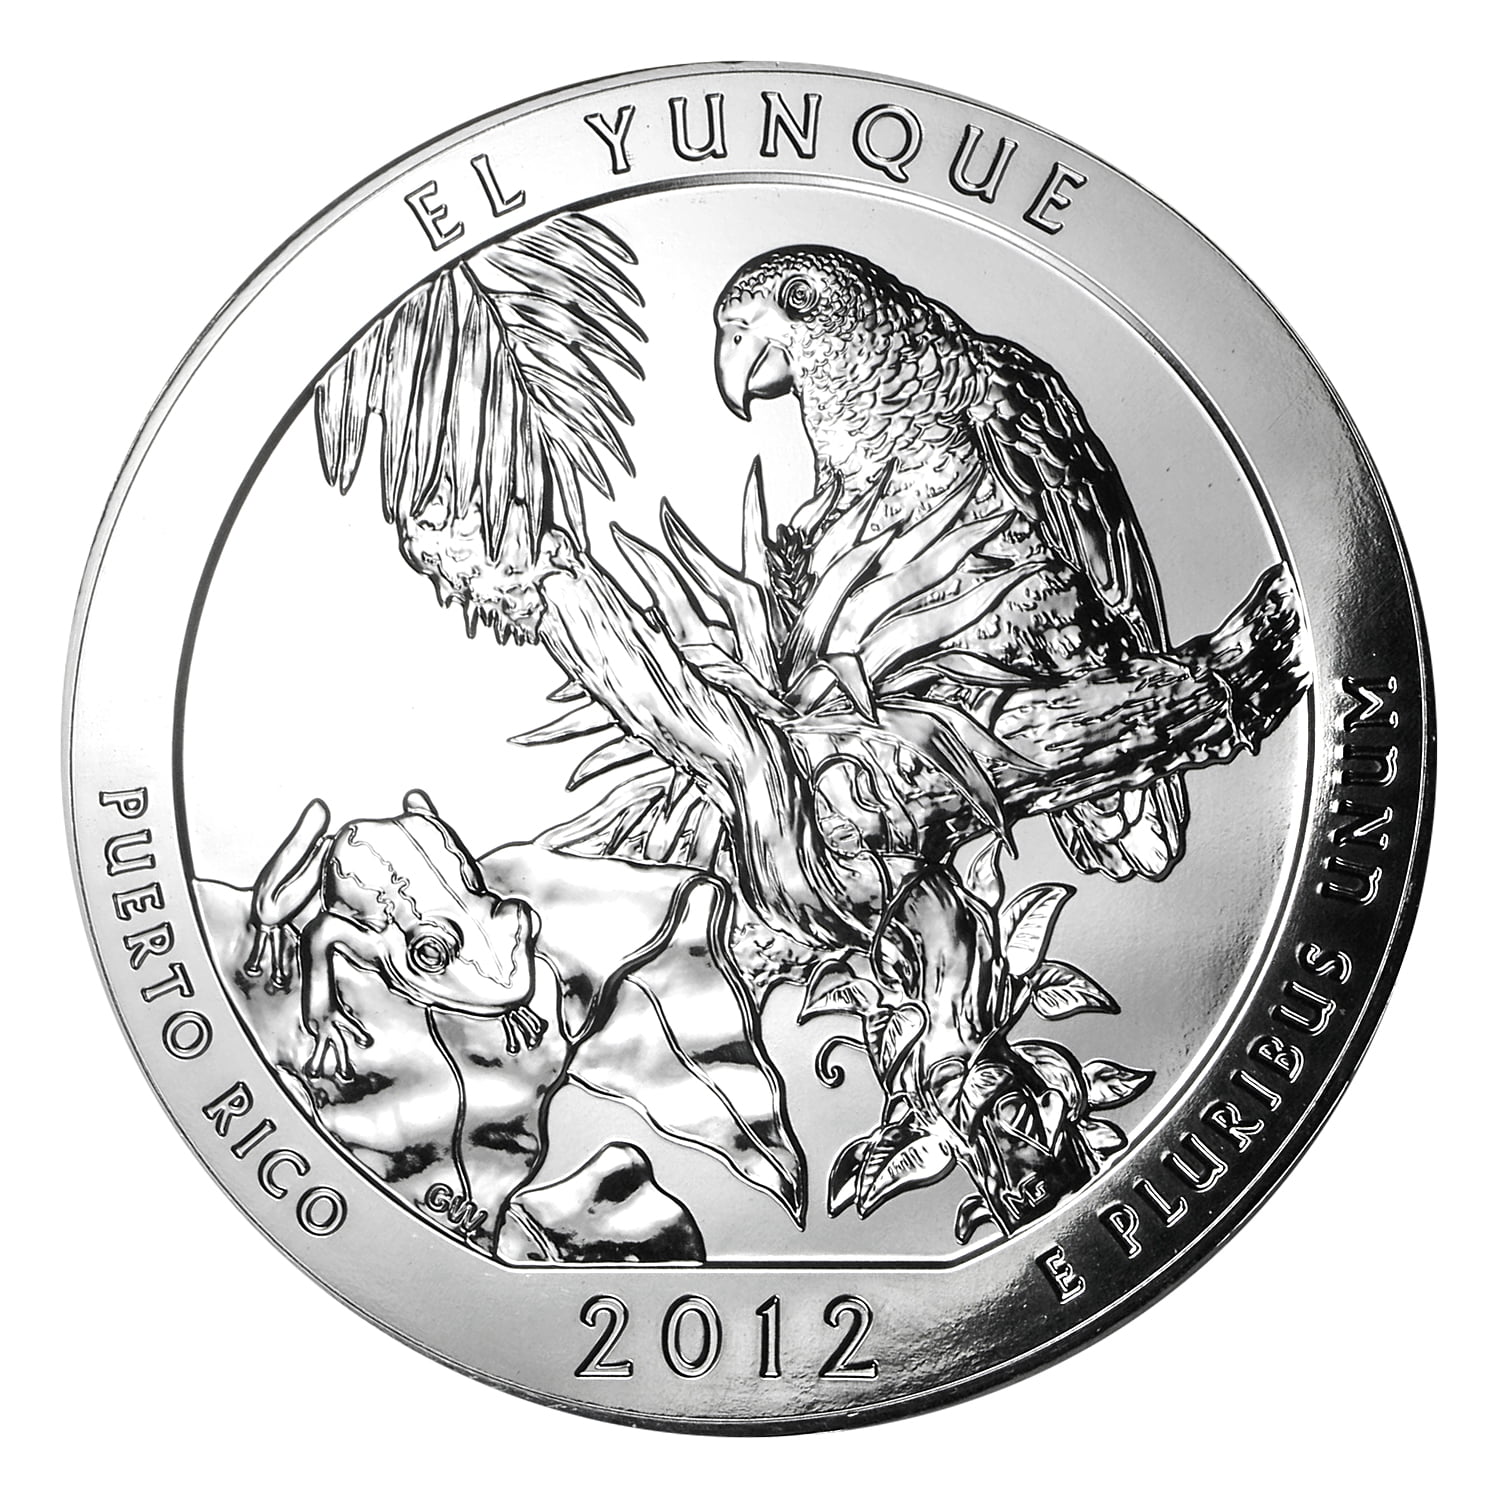 2012 P El Yunque Park Quarter From Uncirculated Mint Sets Combined Shipping 